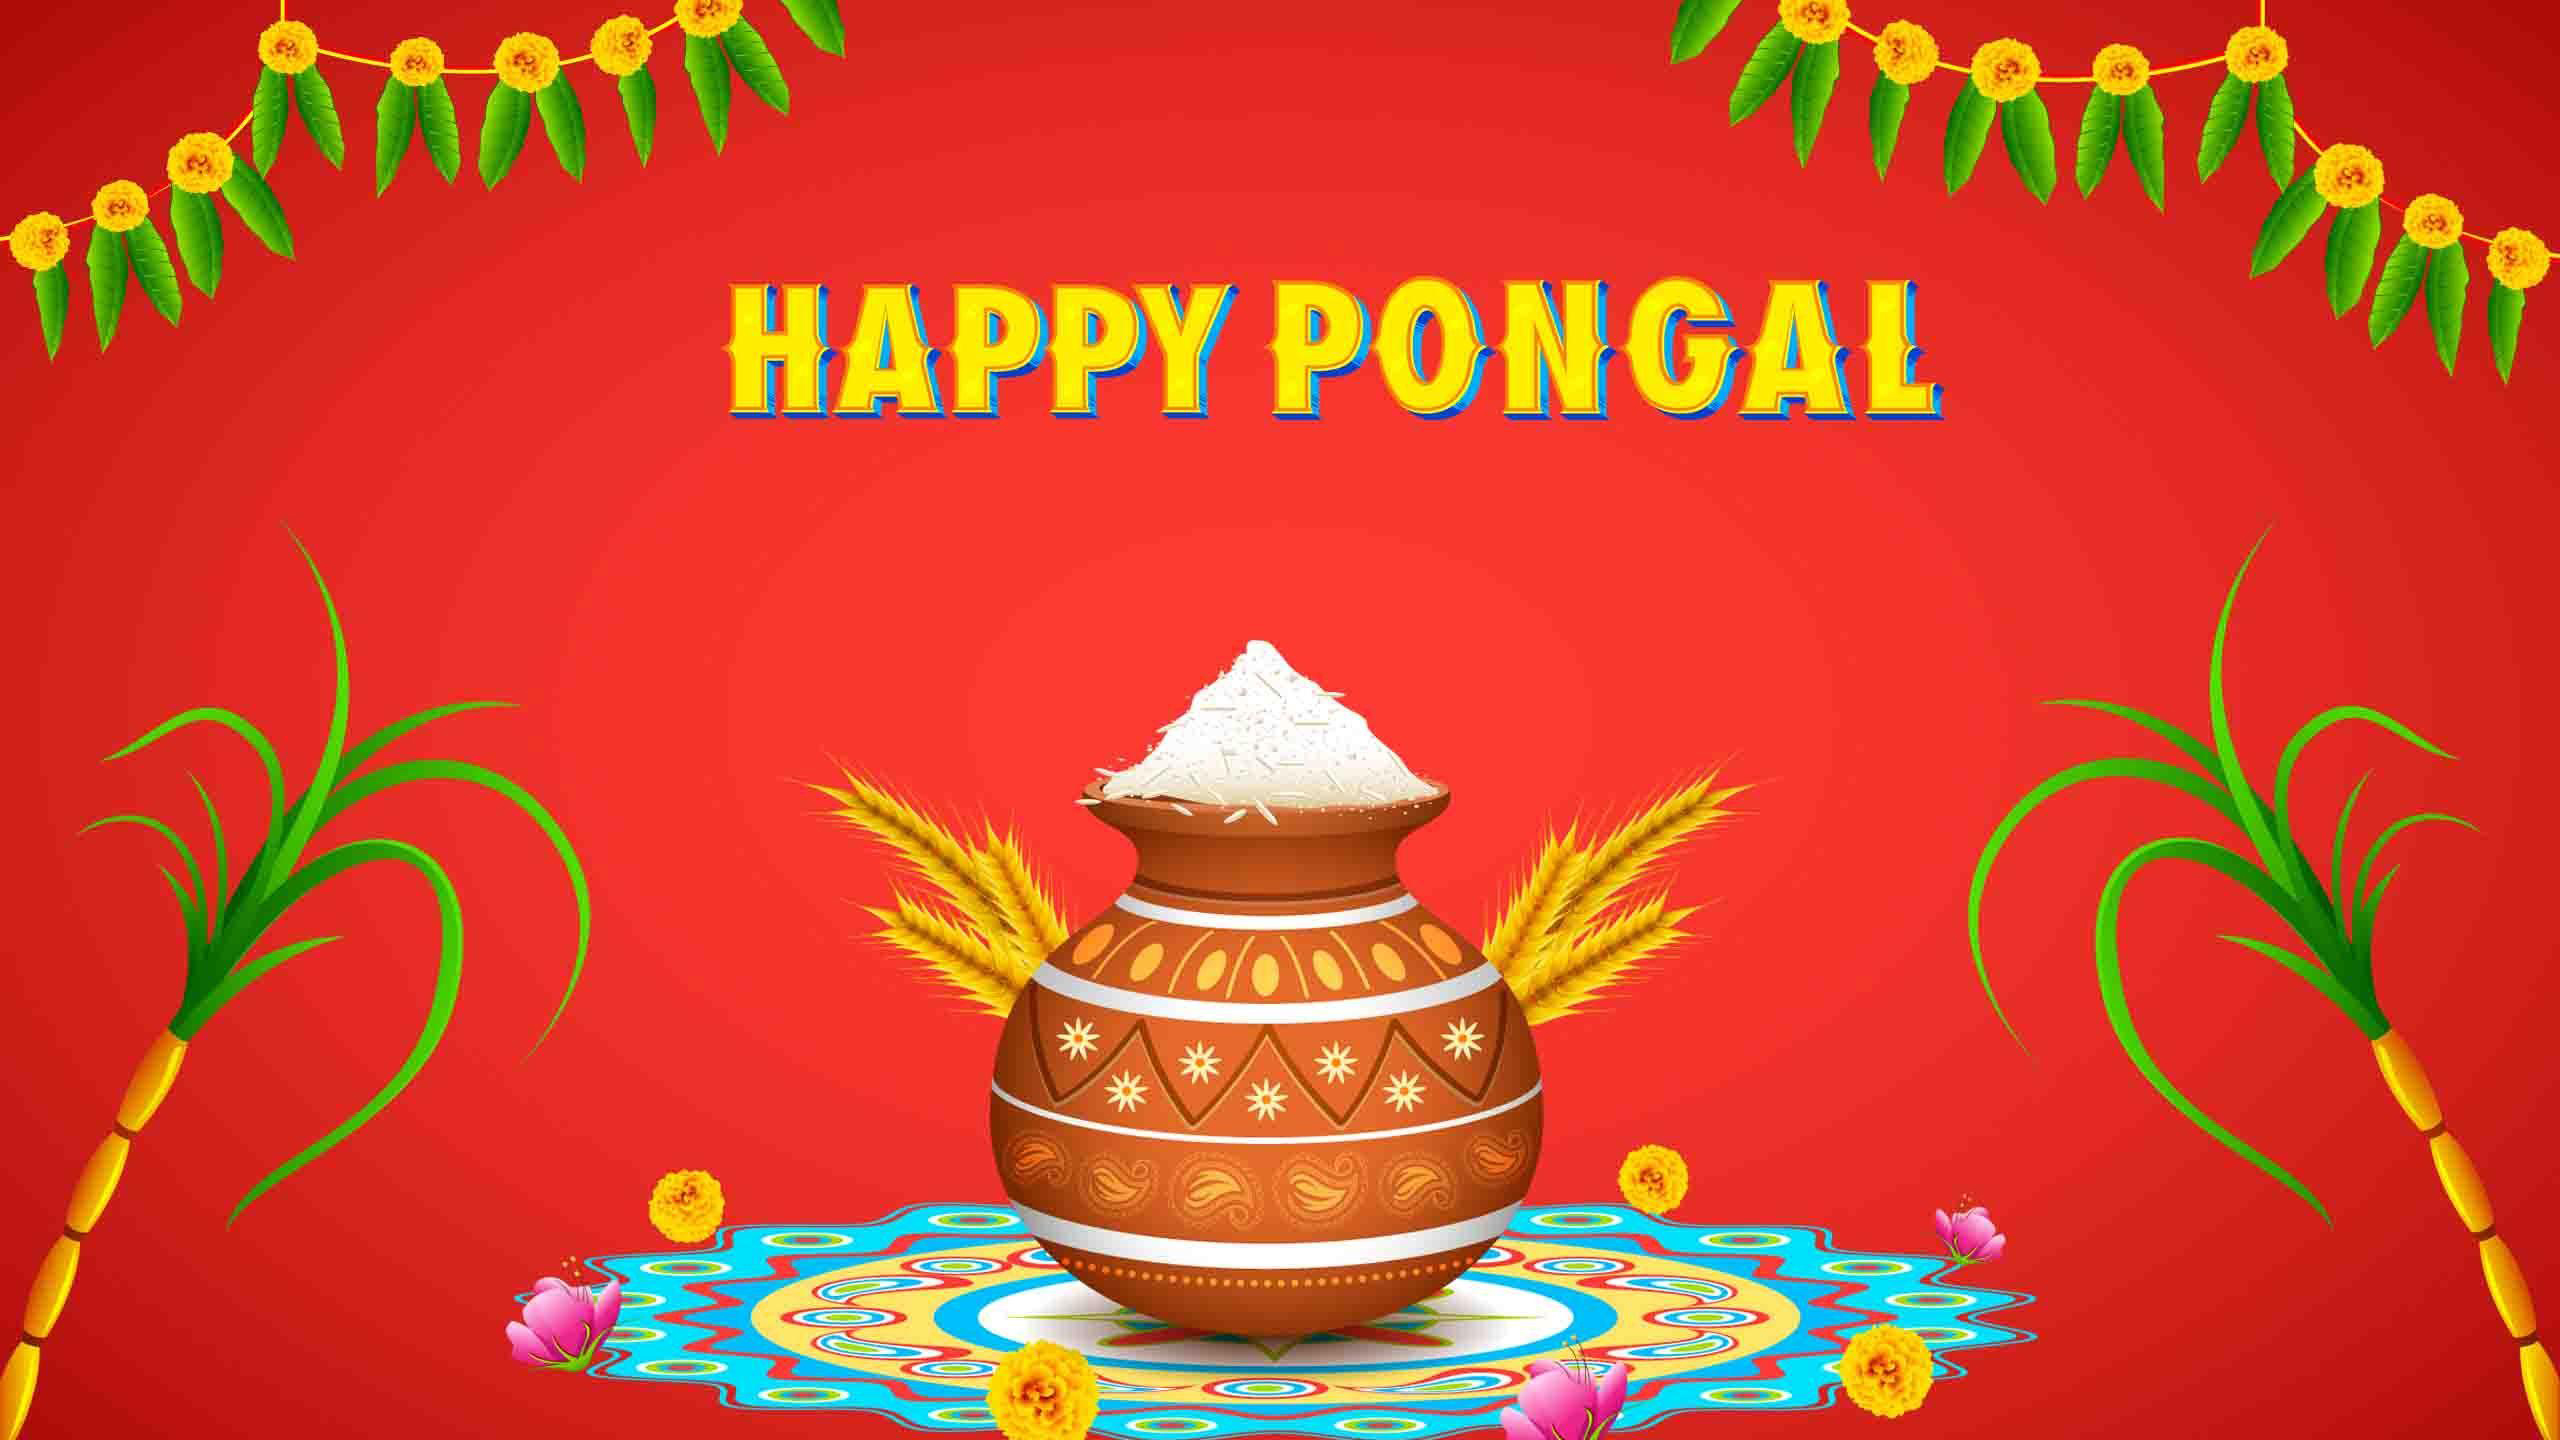 Happy Pongal Red Wallpaper HD Pongal